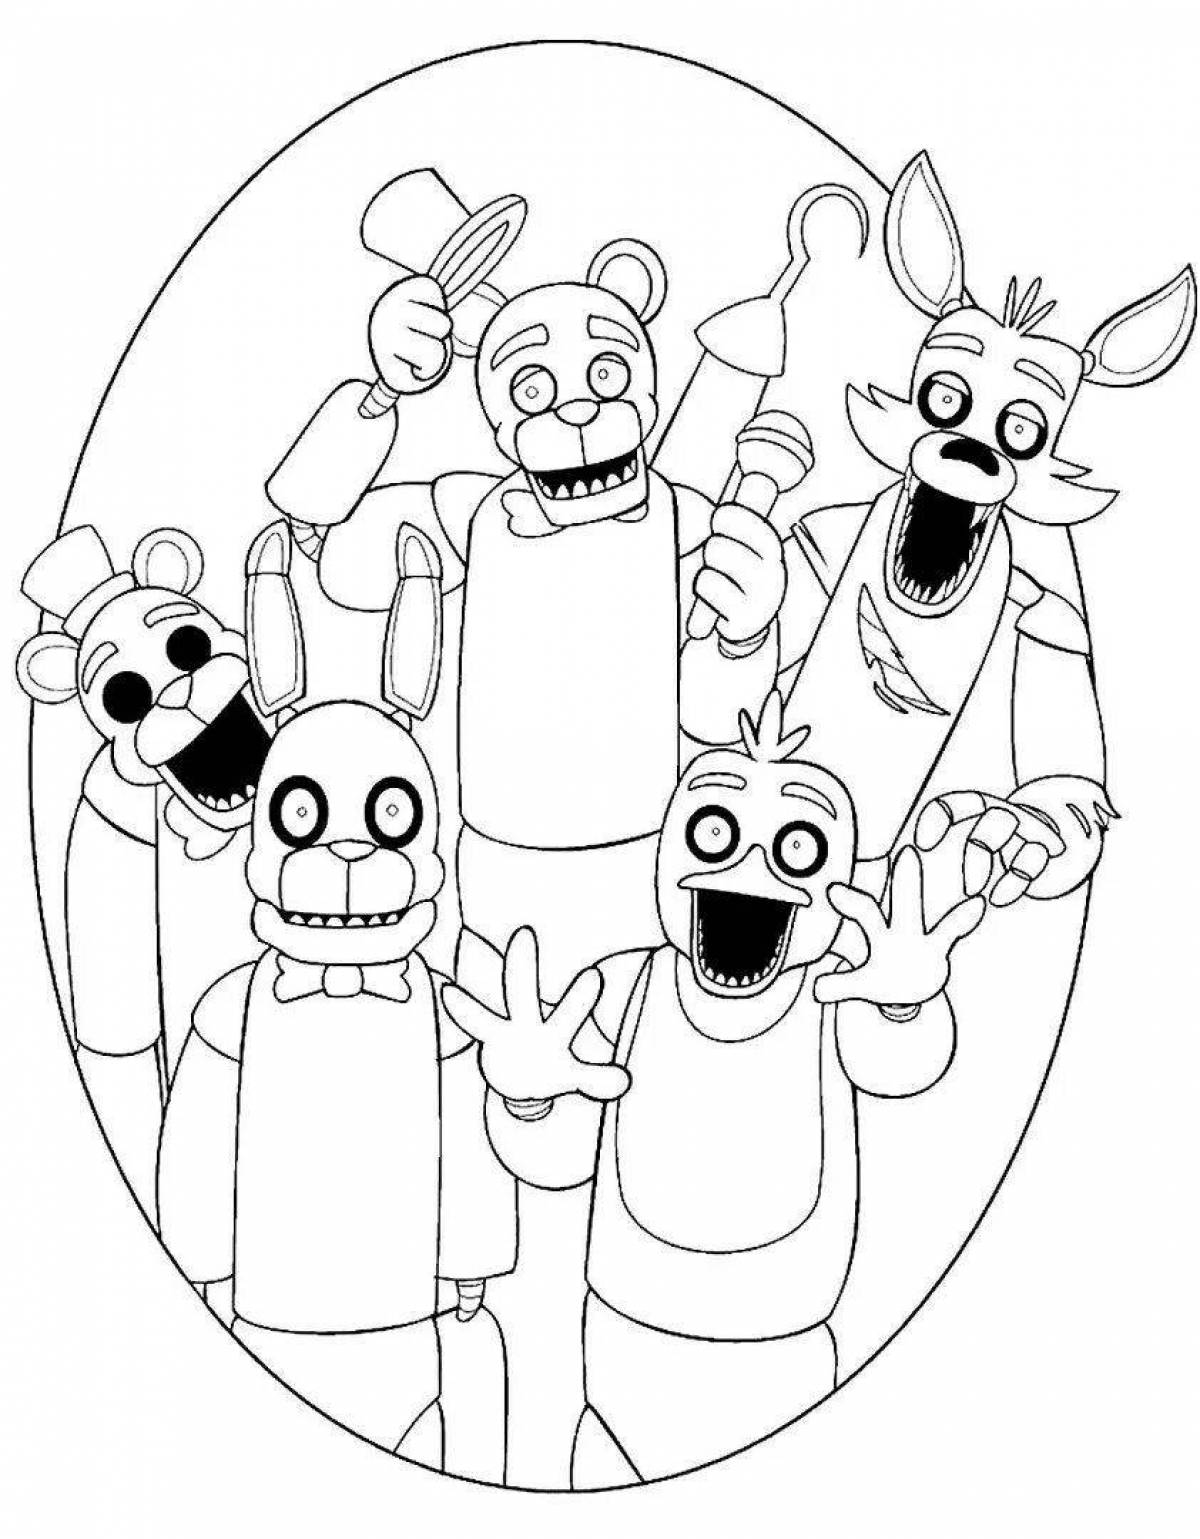 Exciting fnaf 1 coloring